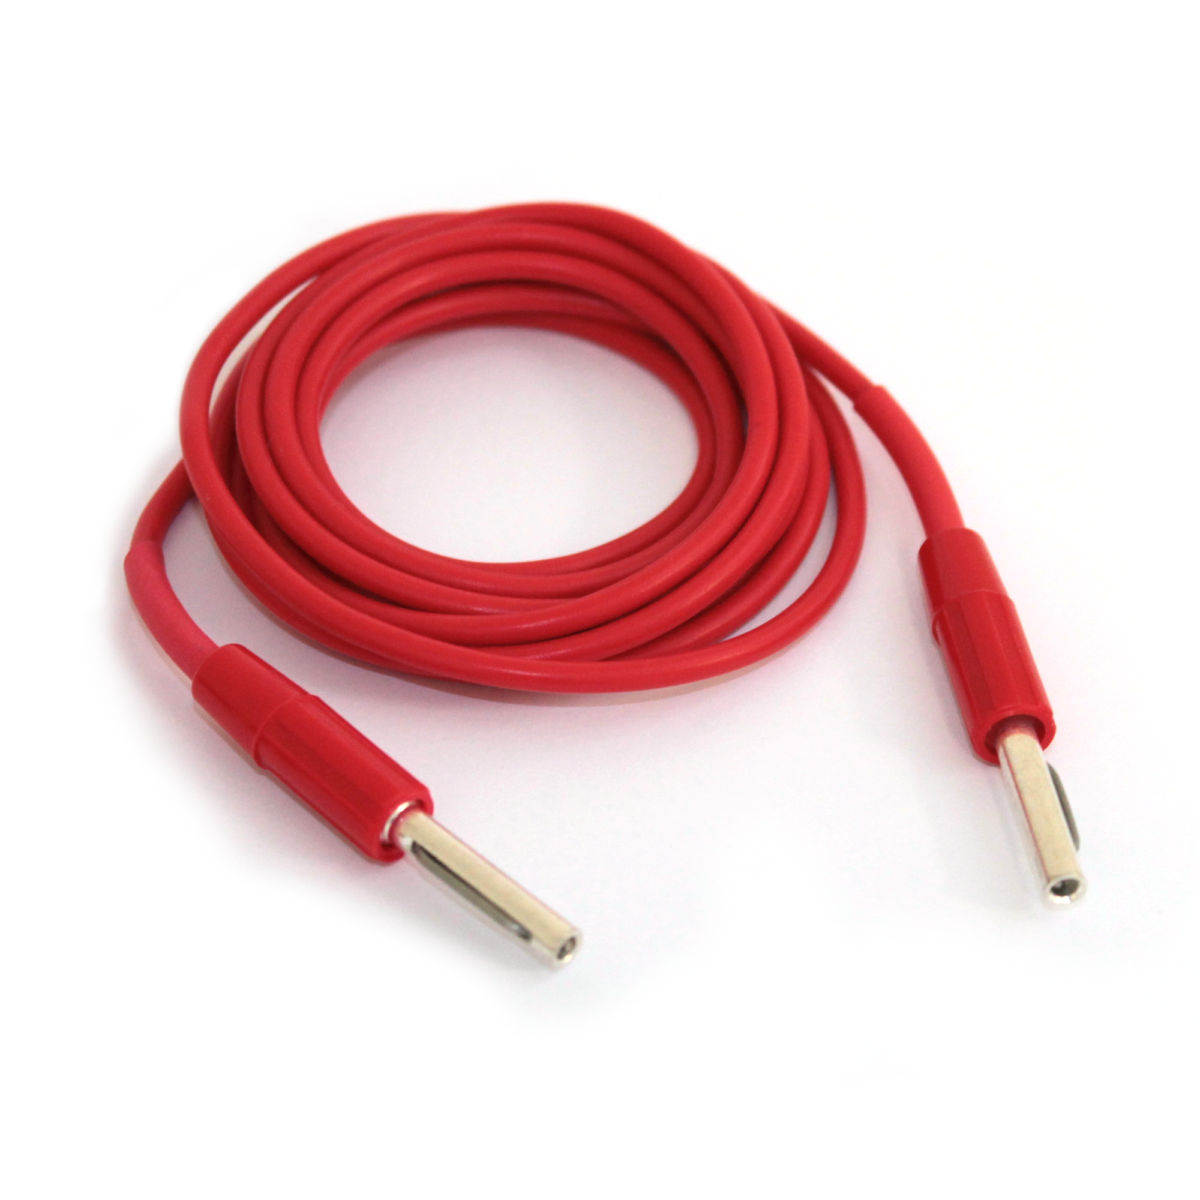 Sterex Red Cable for Indifferent Electrode